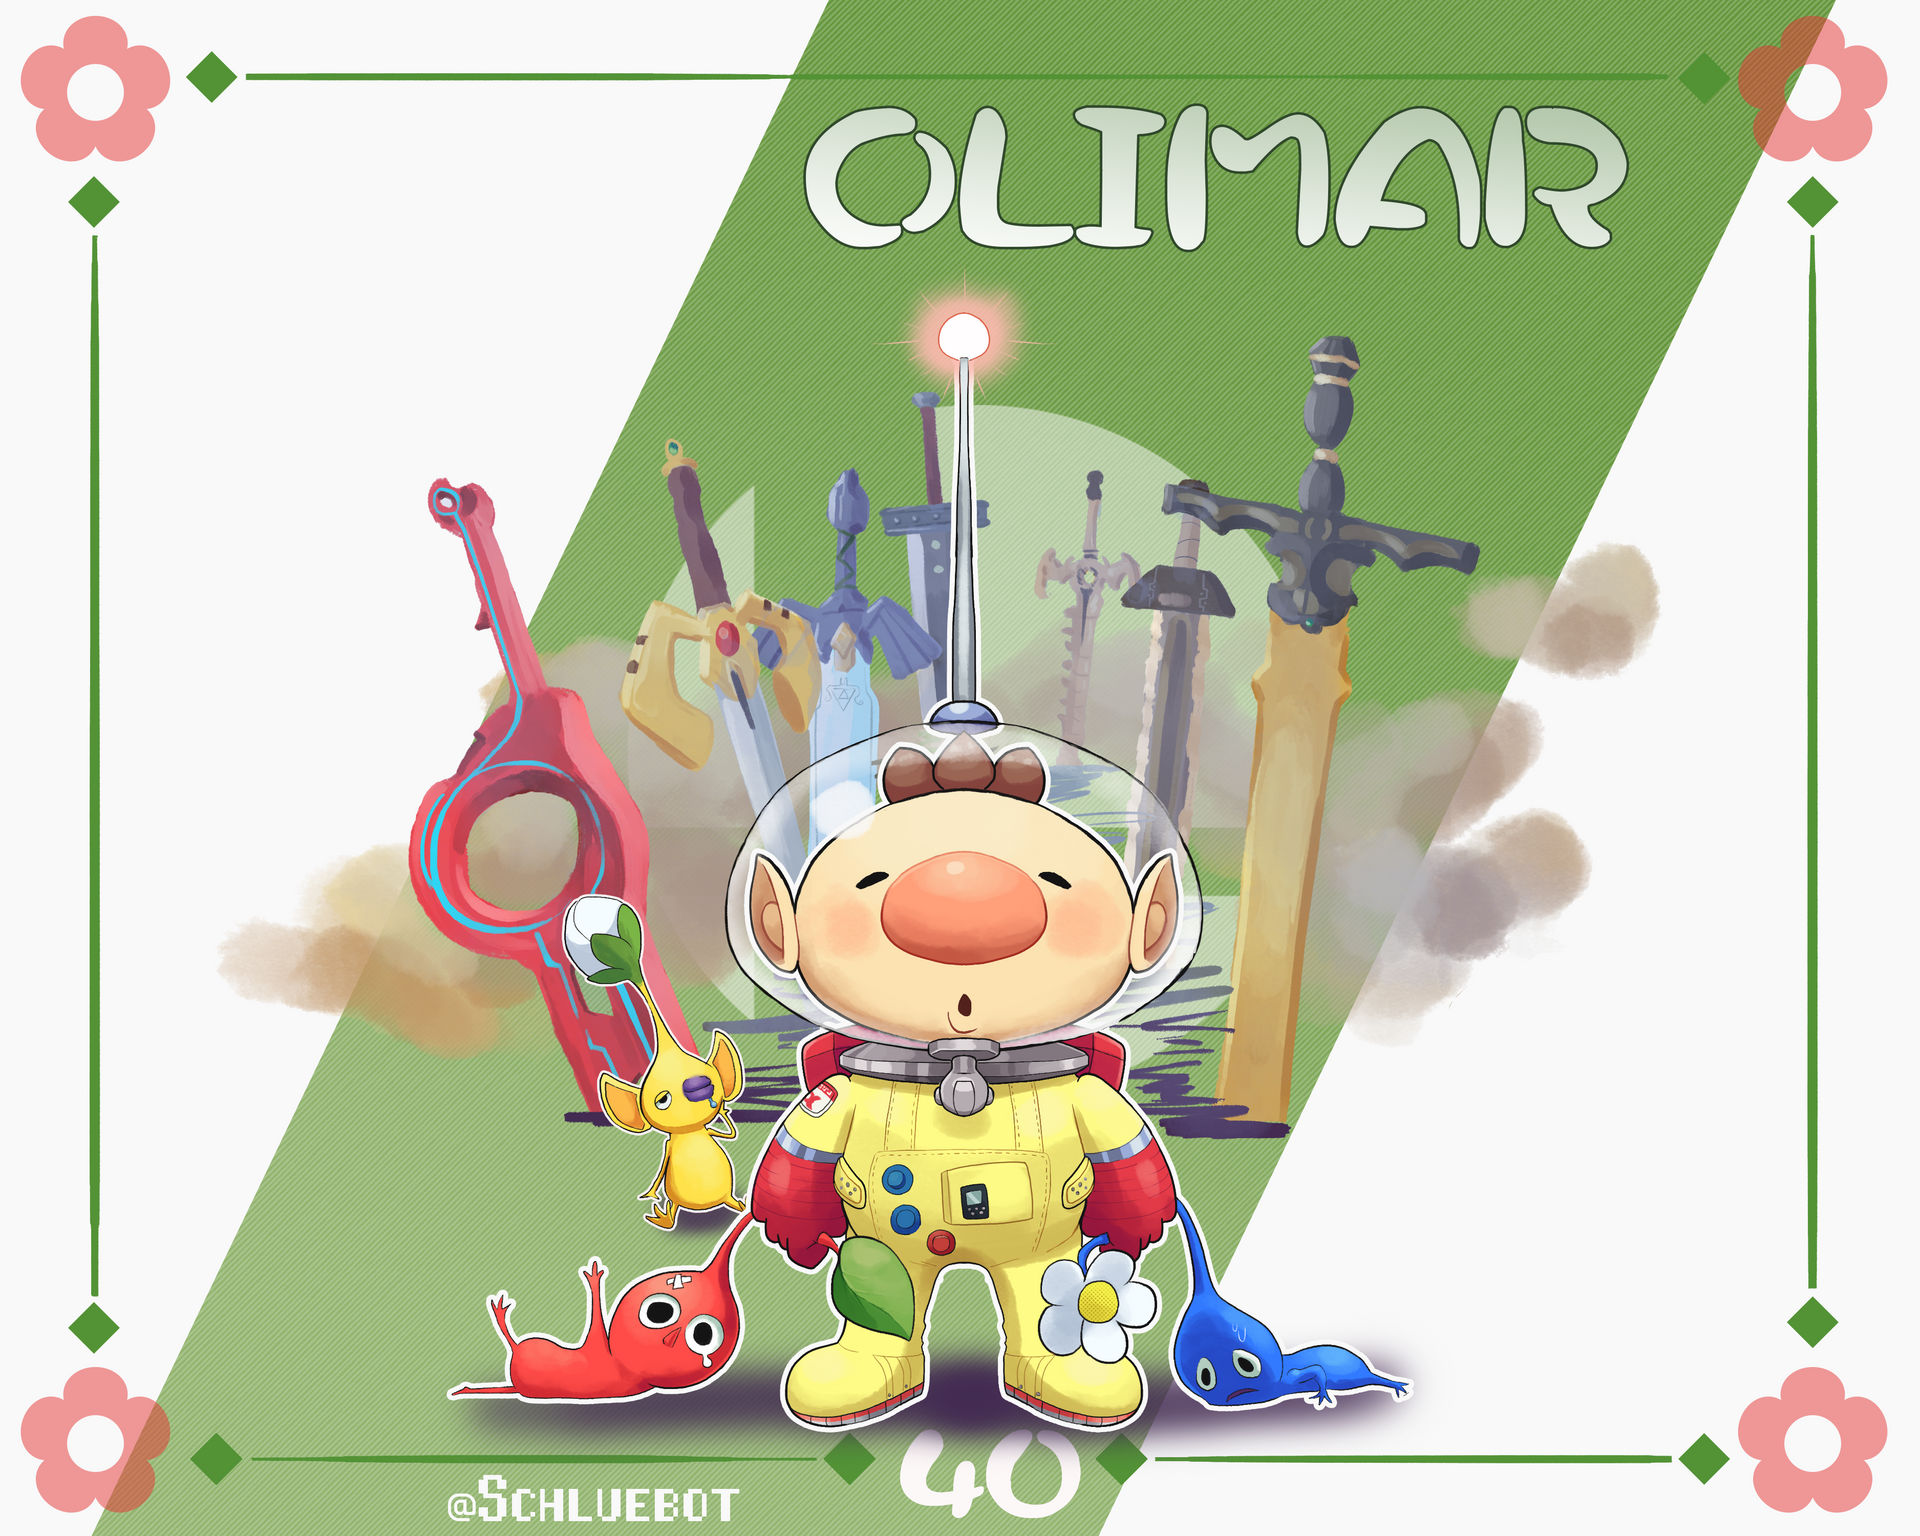 Smash Ultimate #40: Olimar by Andy-roo78 on DeviantArt